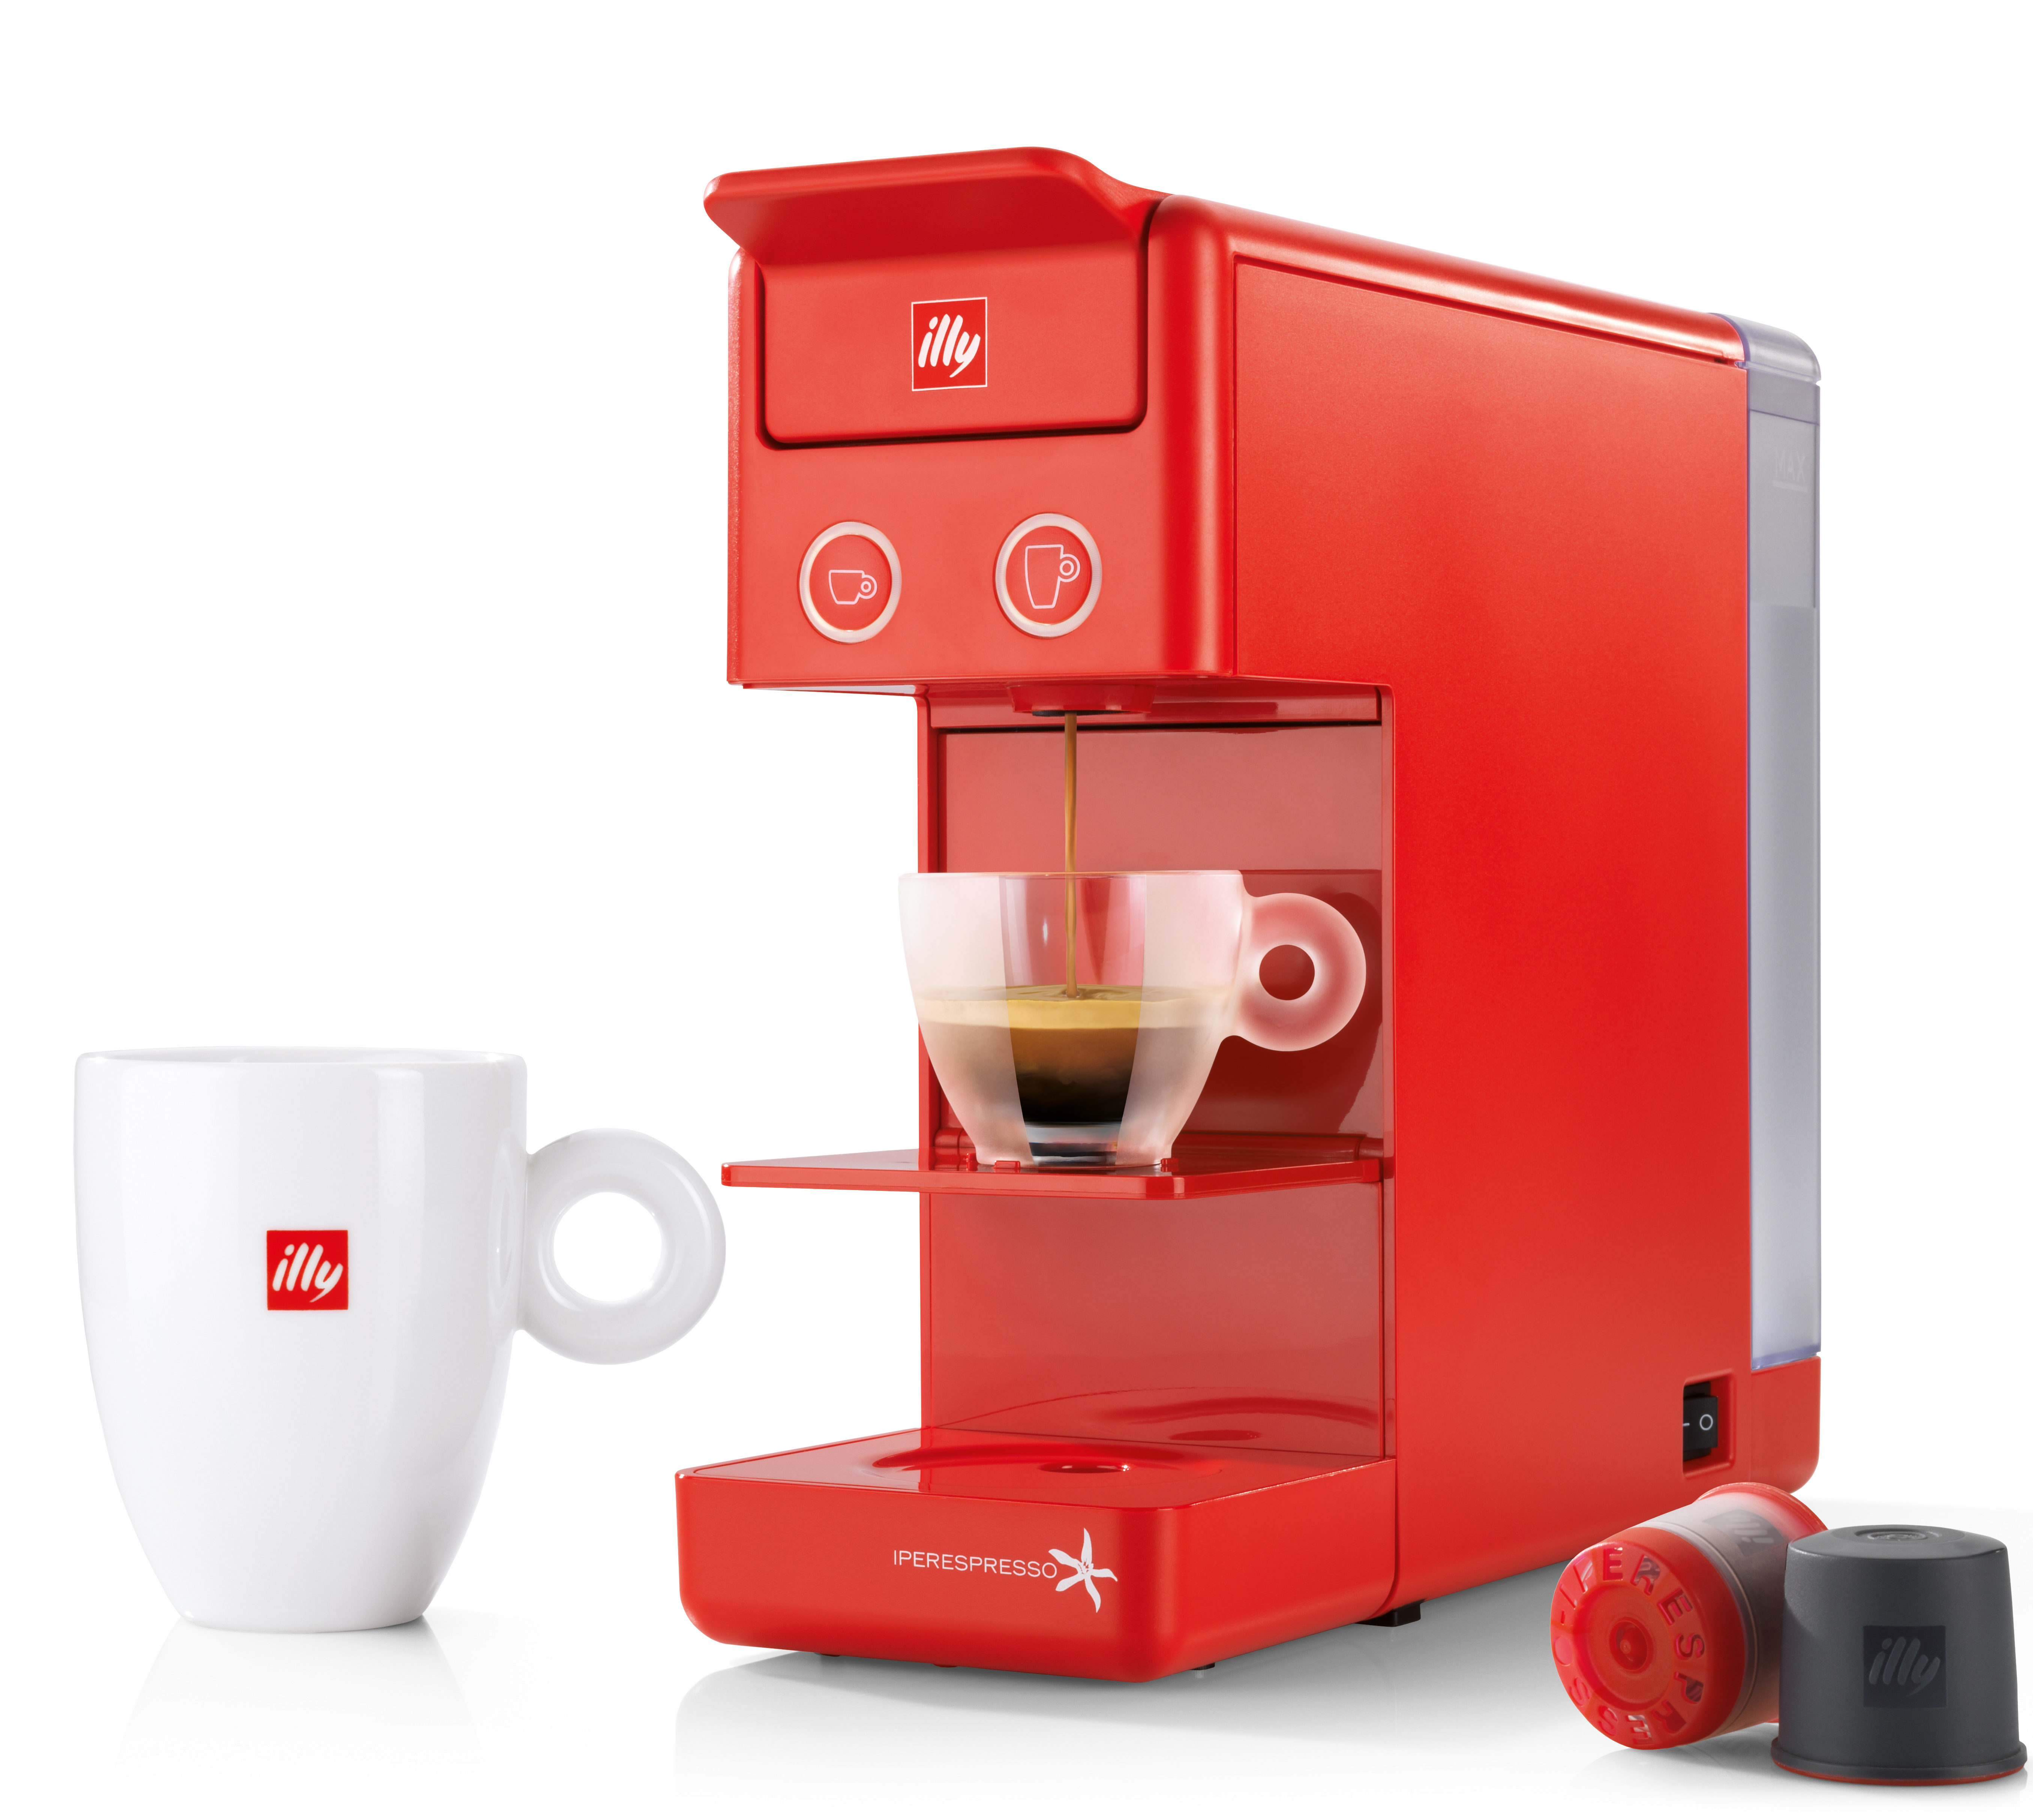 ILLY ESPRESSO MACHINE, TWO PROGRAMMABLE COFFEE SETTINGS, RED, FRANCIS Y3.2 